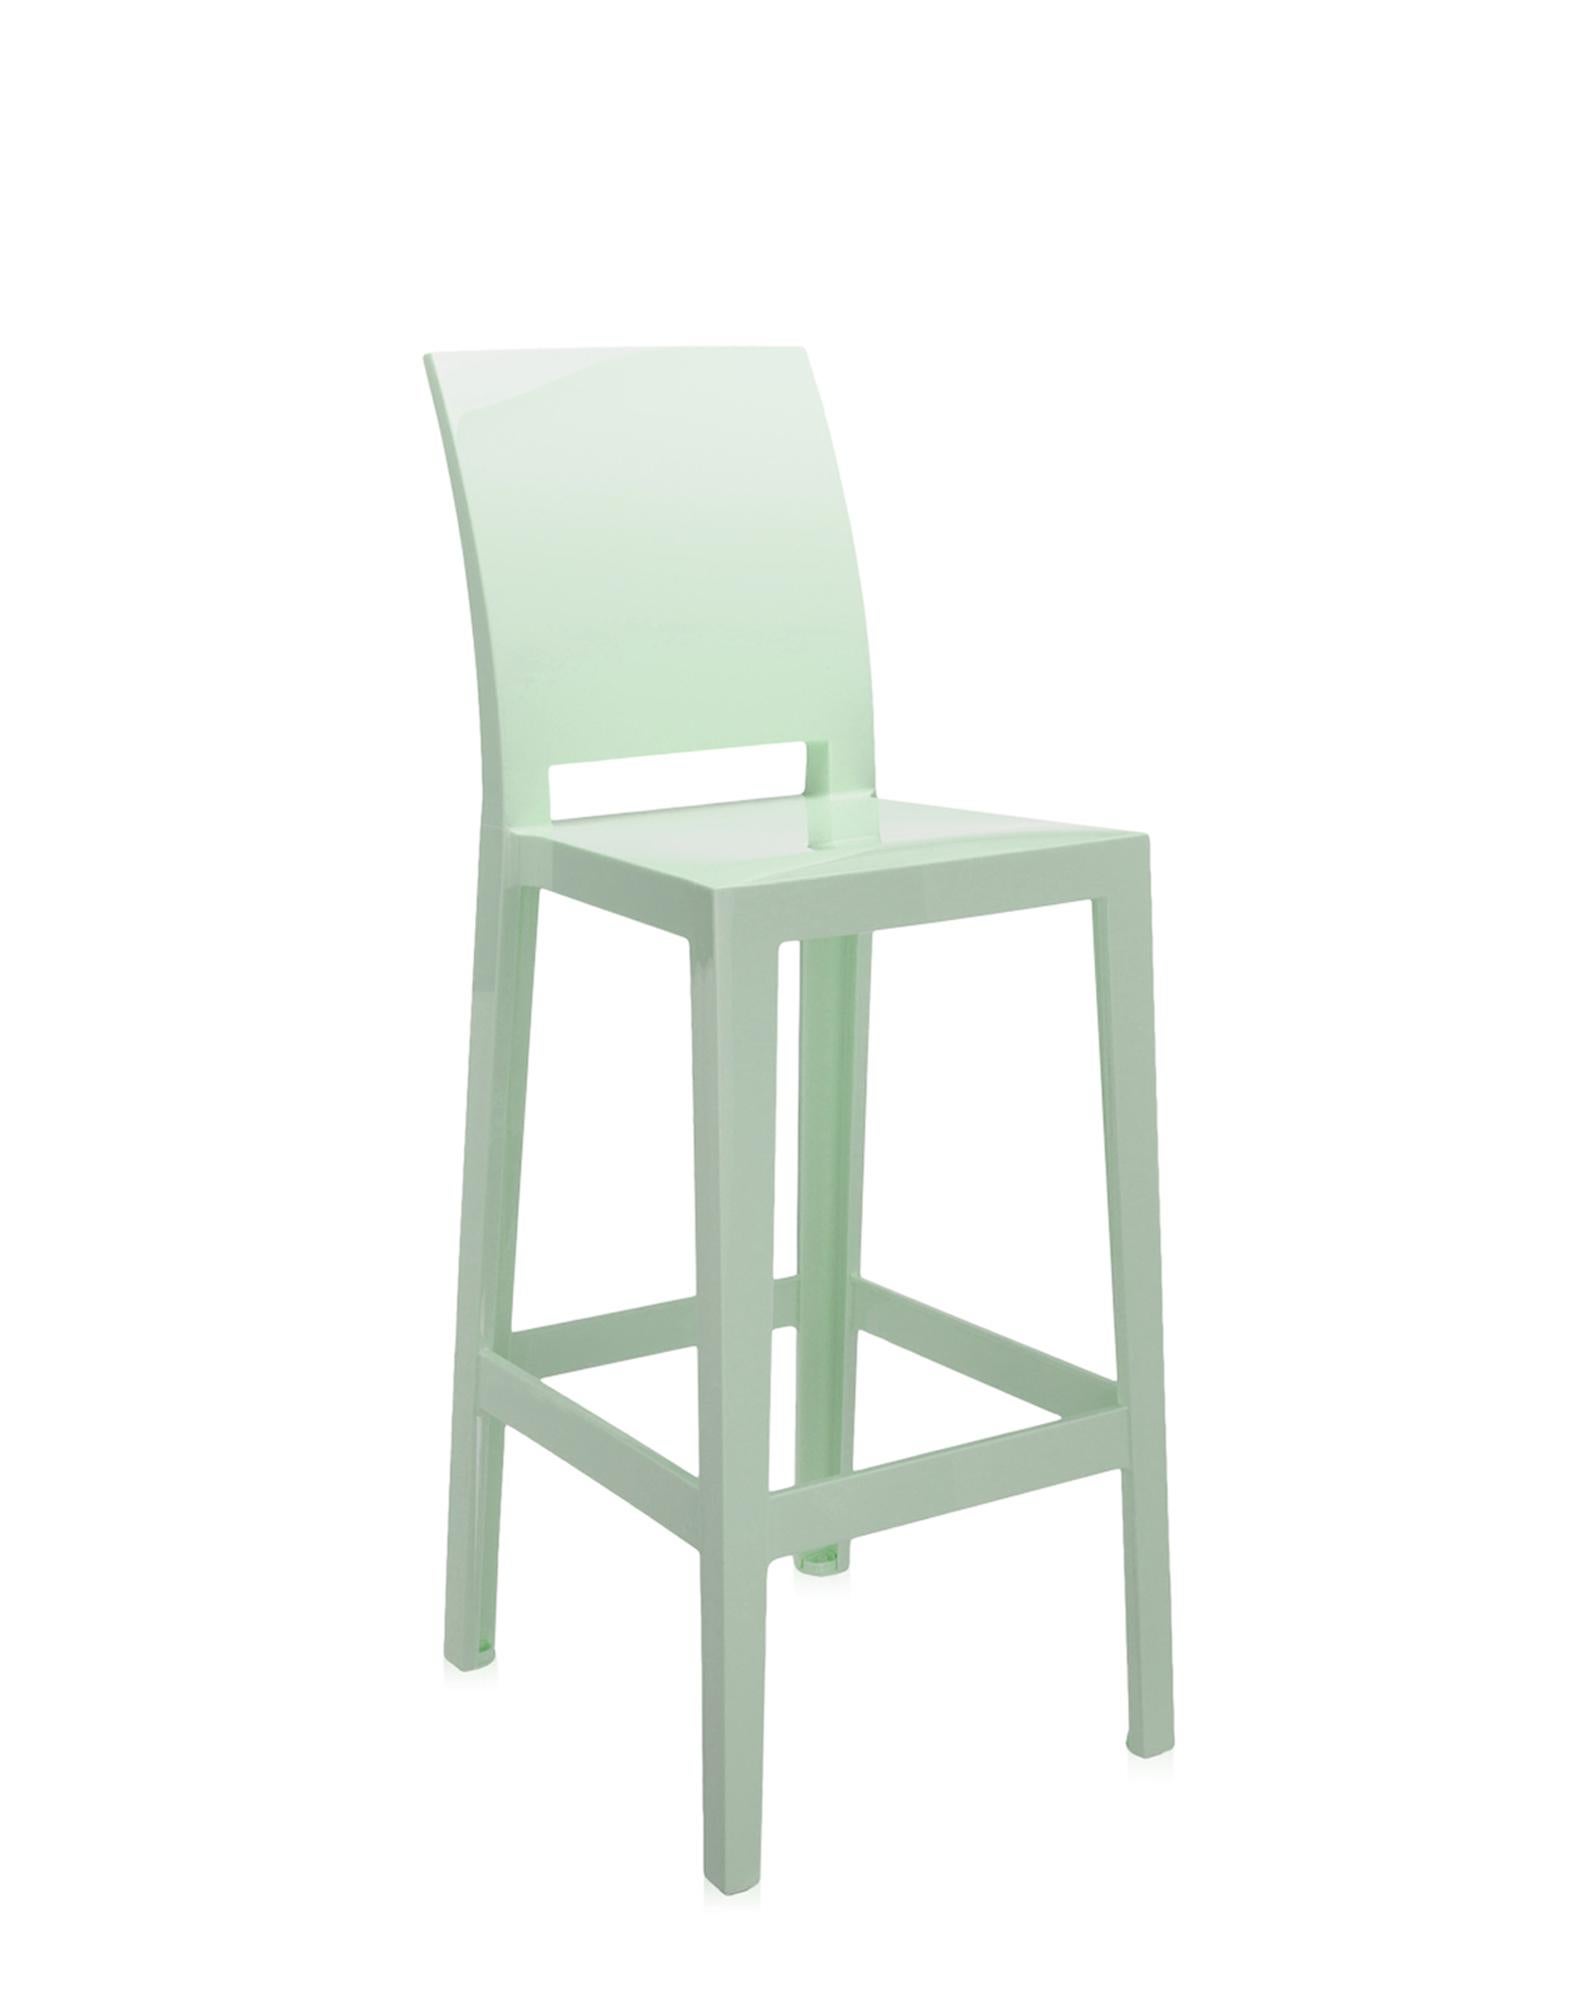 If you want to sip a drink at the bar in peace and quiet, you need a comfortable tall stool with a back to lean against. Sometimes one drink is not enough, and you need 